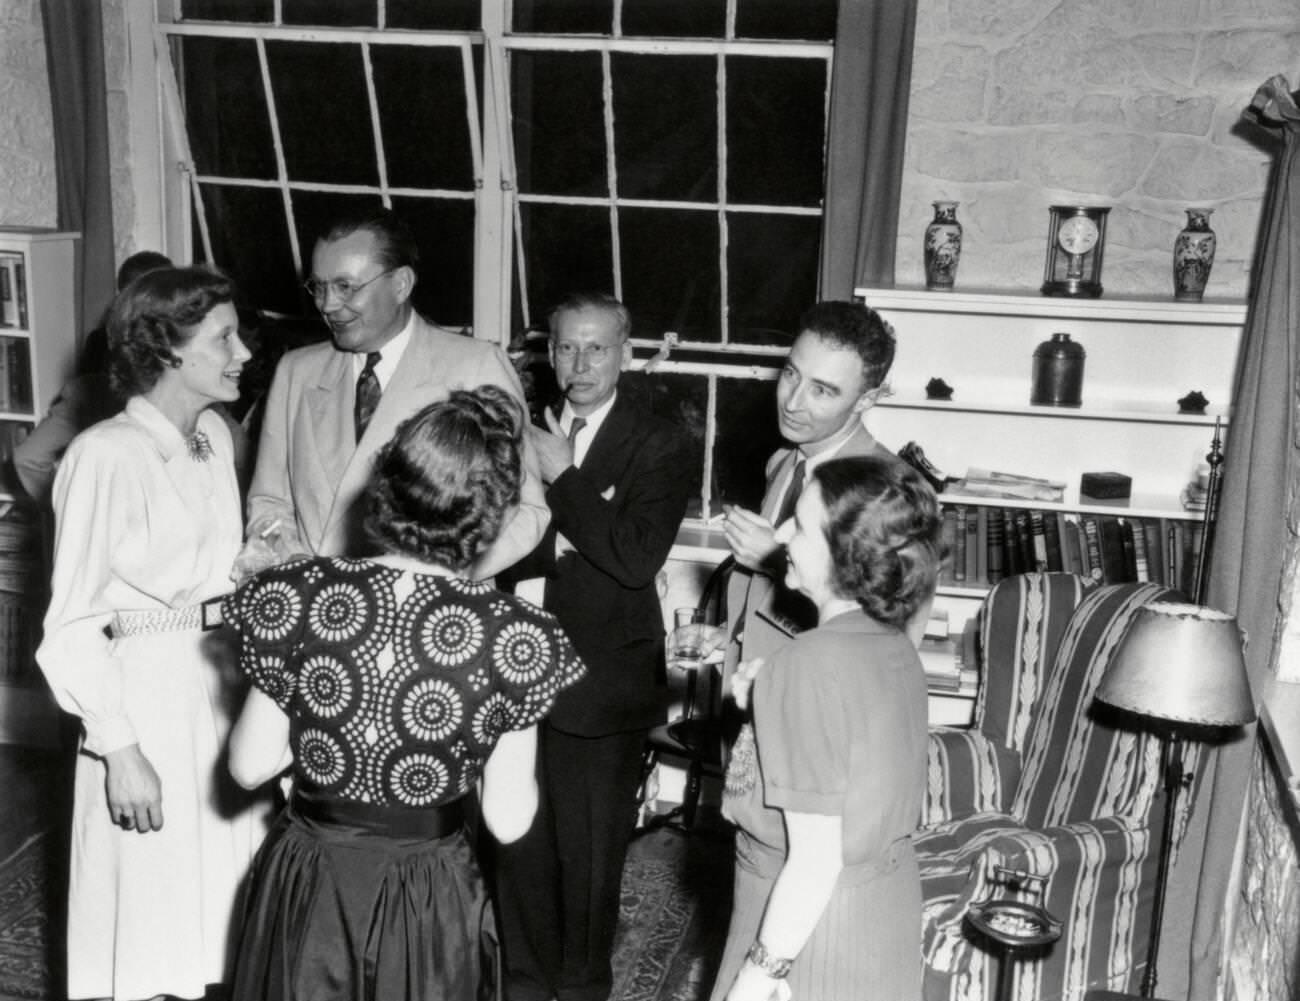 Party at the 'Big House', Robert Oppenheimer's residence during the Manhattan Project at Los Alamos.